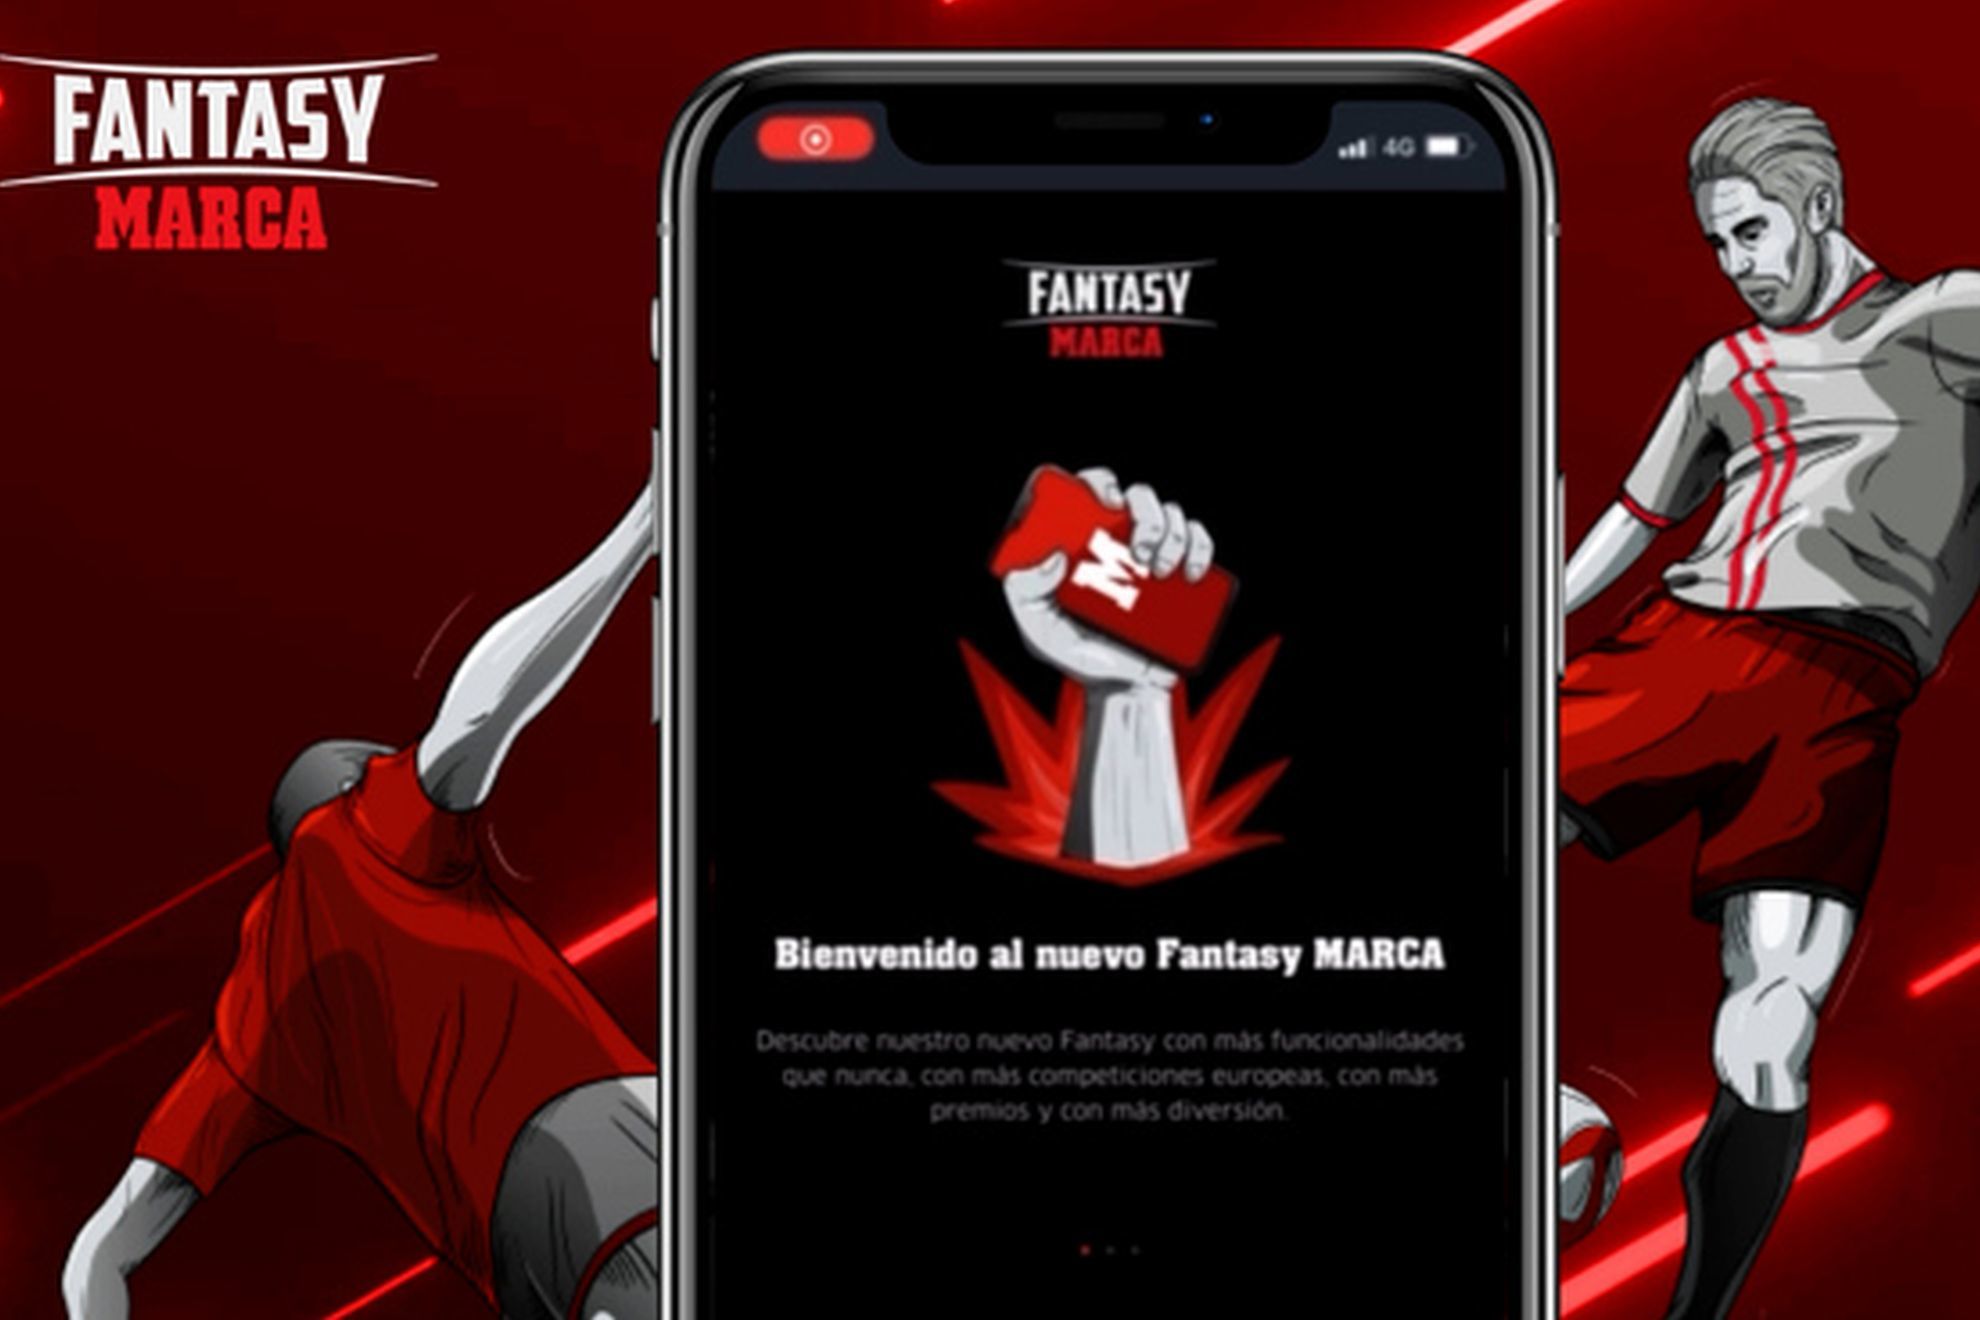 MARCA launches a new fantasy game for the best leagues in the world